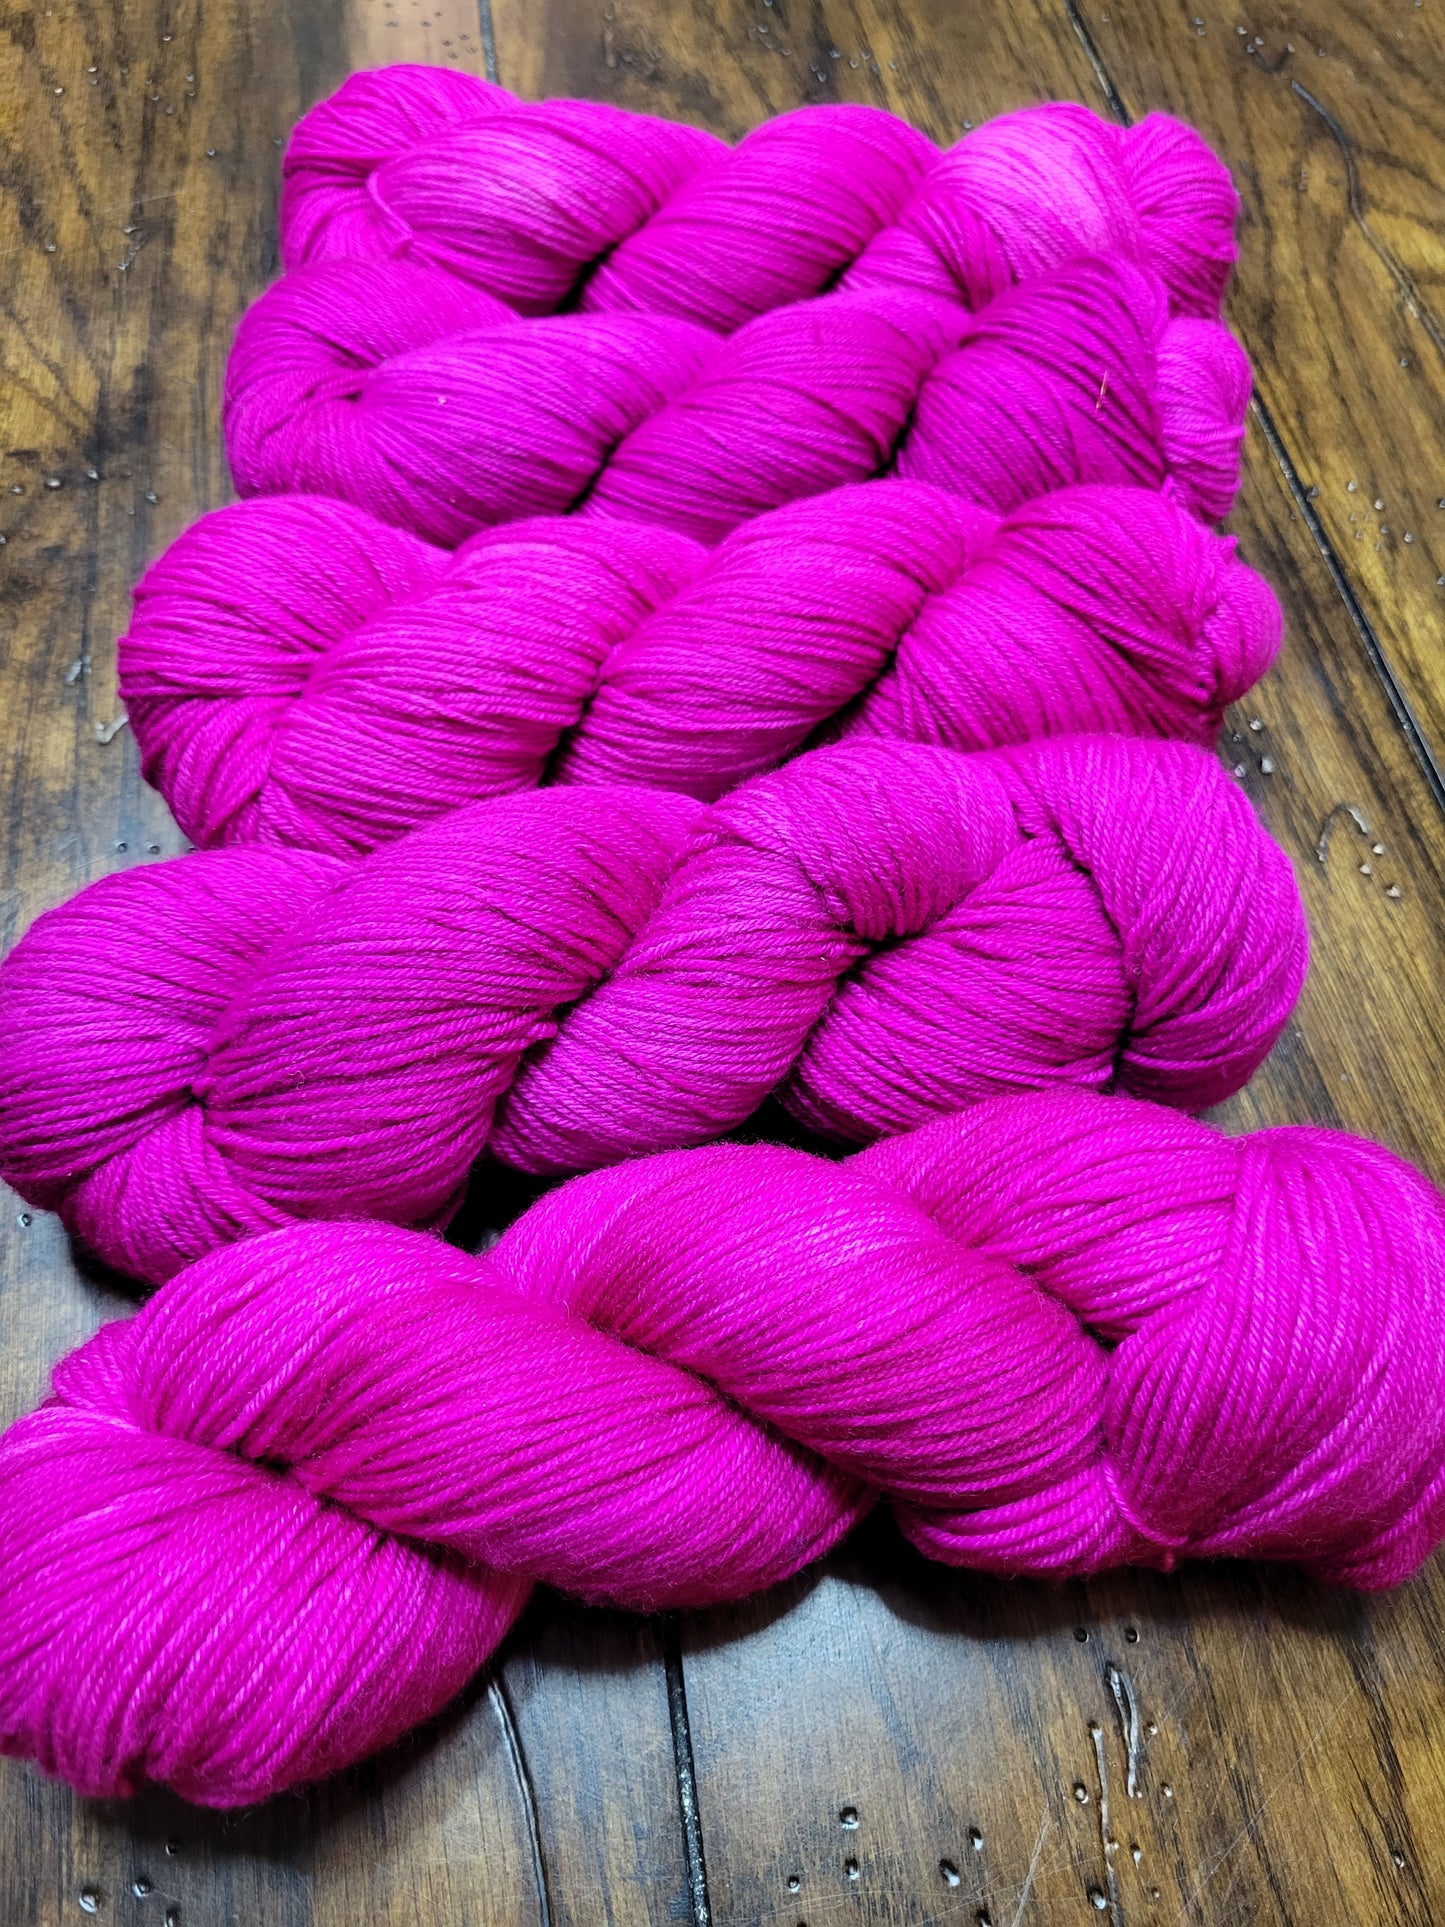 Hand Dyed Yarn - Curiouser & Curiouser